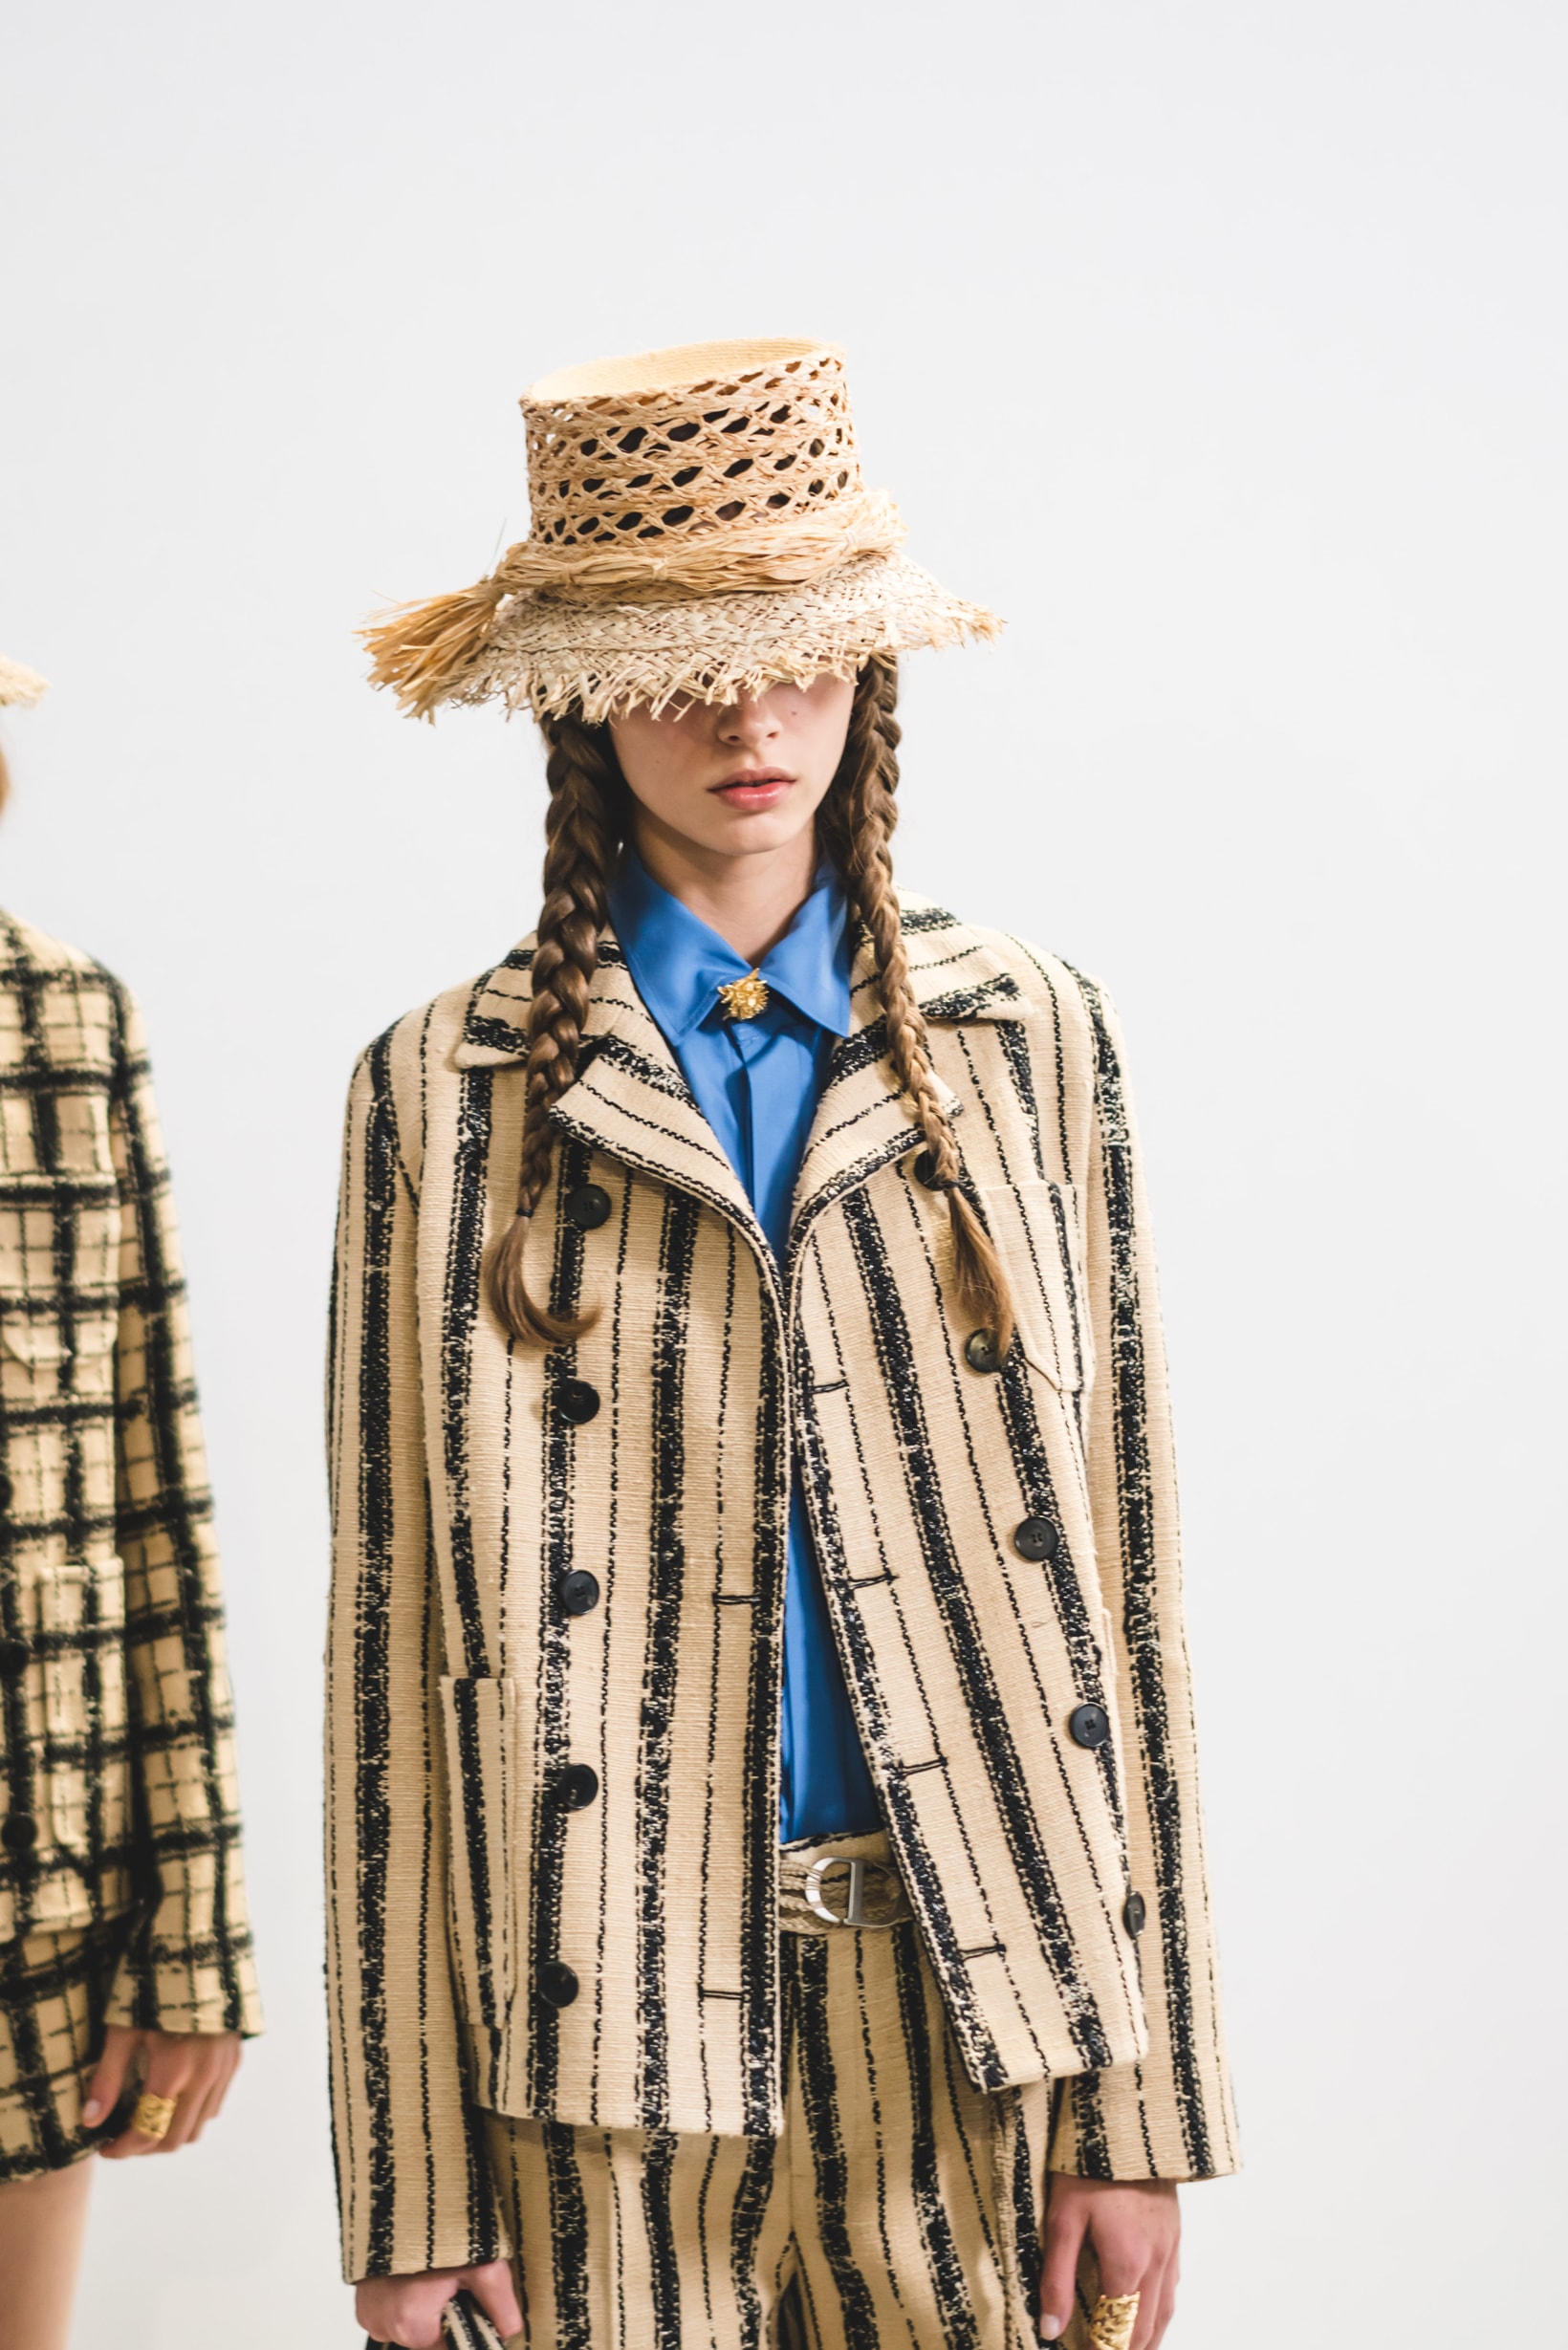 Dior Spring Summer 2020 Paris Fashion Week Collection Show Backstage Look Jackets Hat Tan